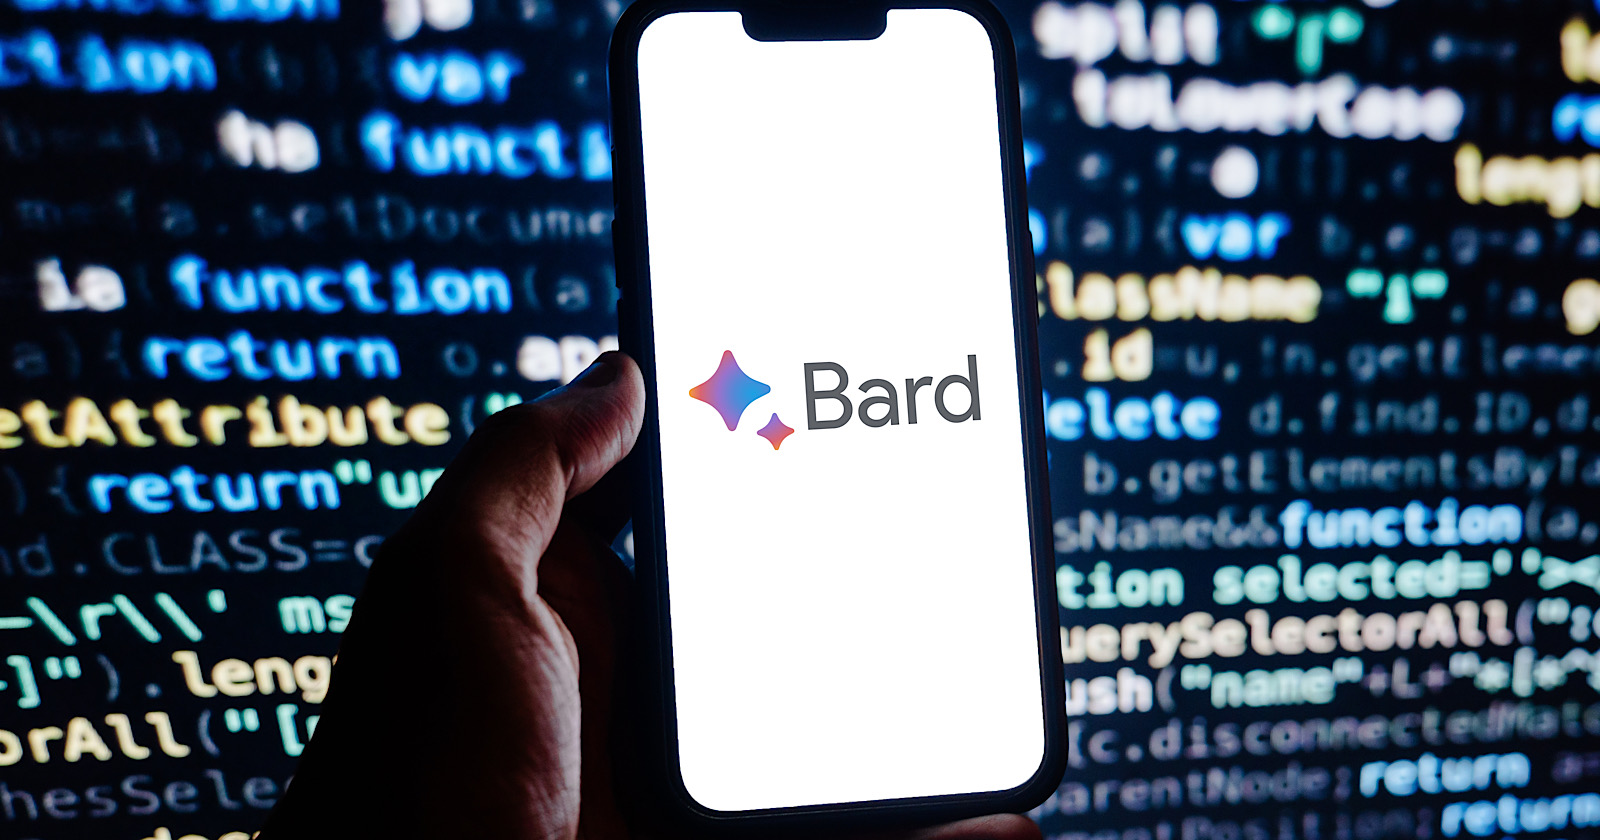 Google Indexing Public Bard Conversations In Search Results